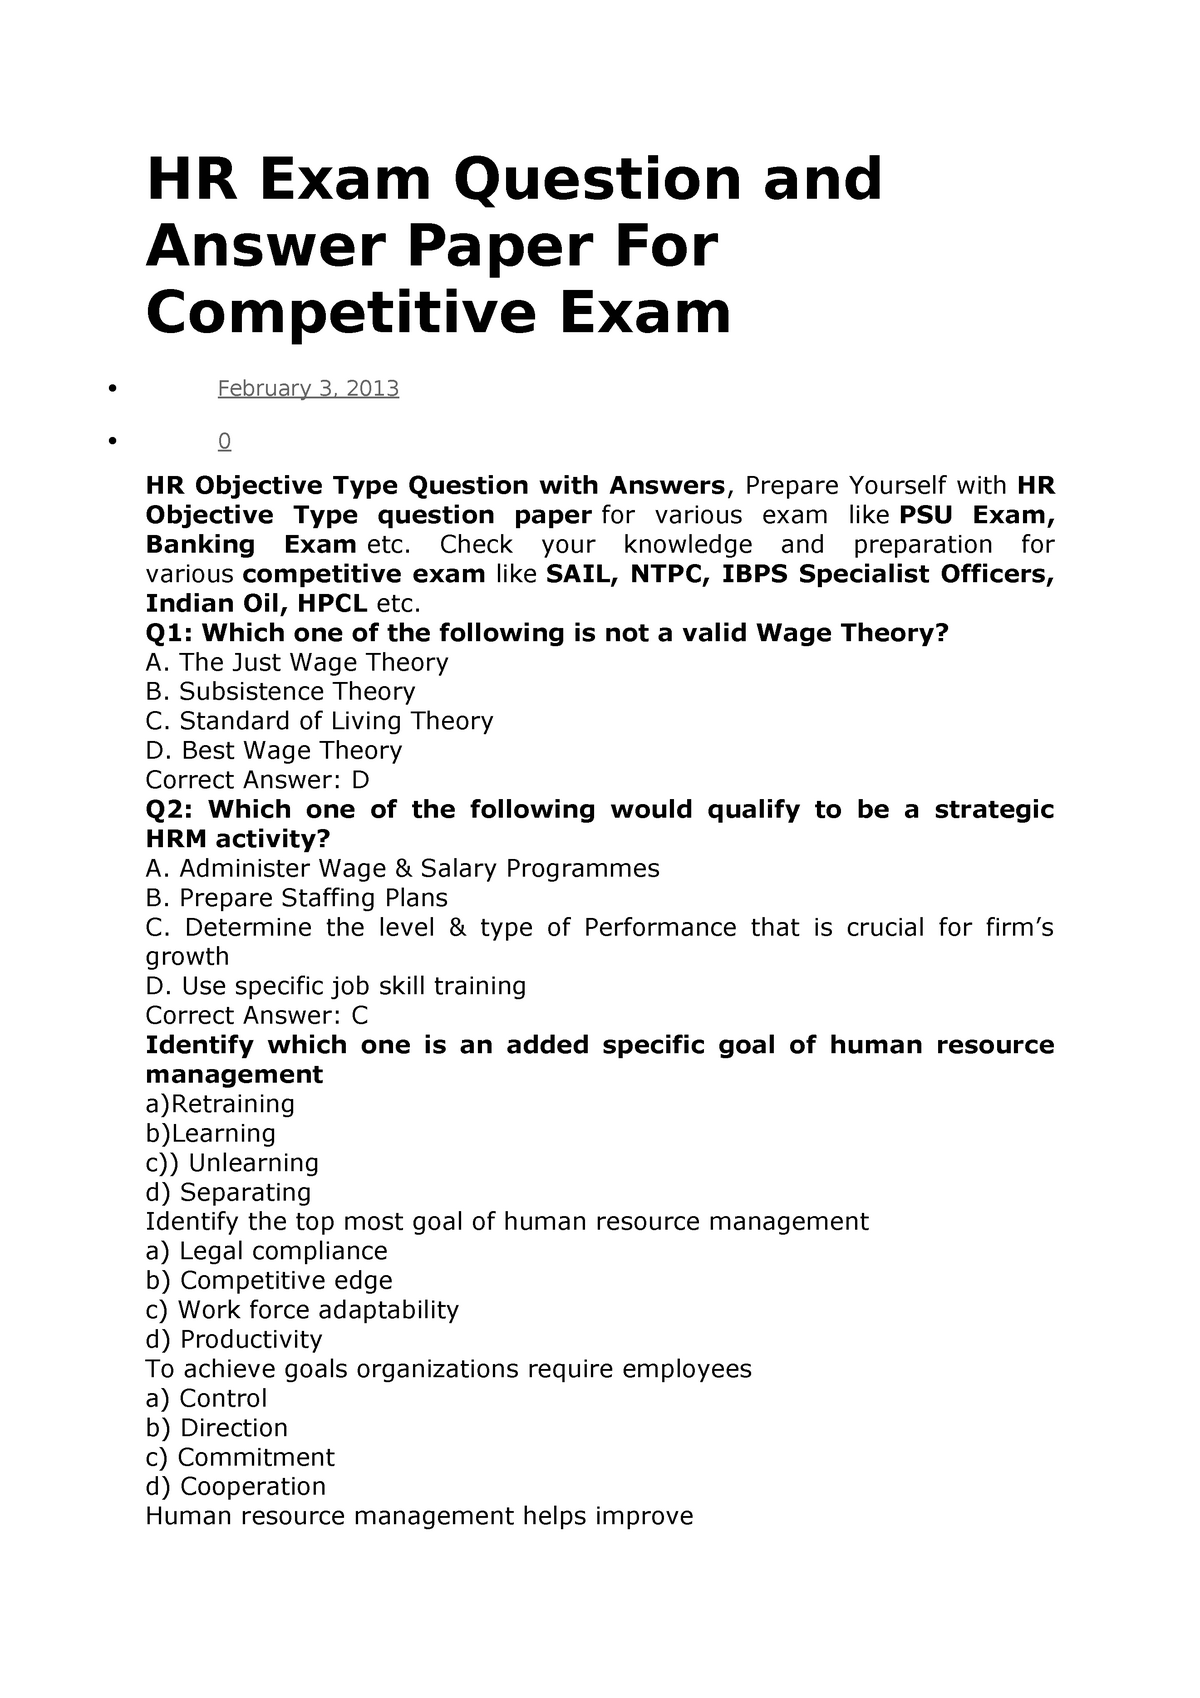 hrm essay questions and answers